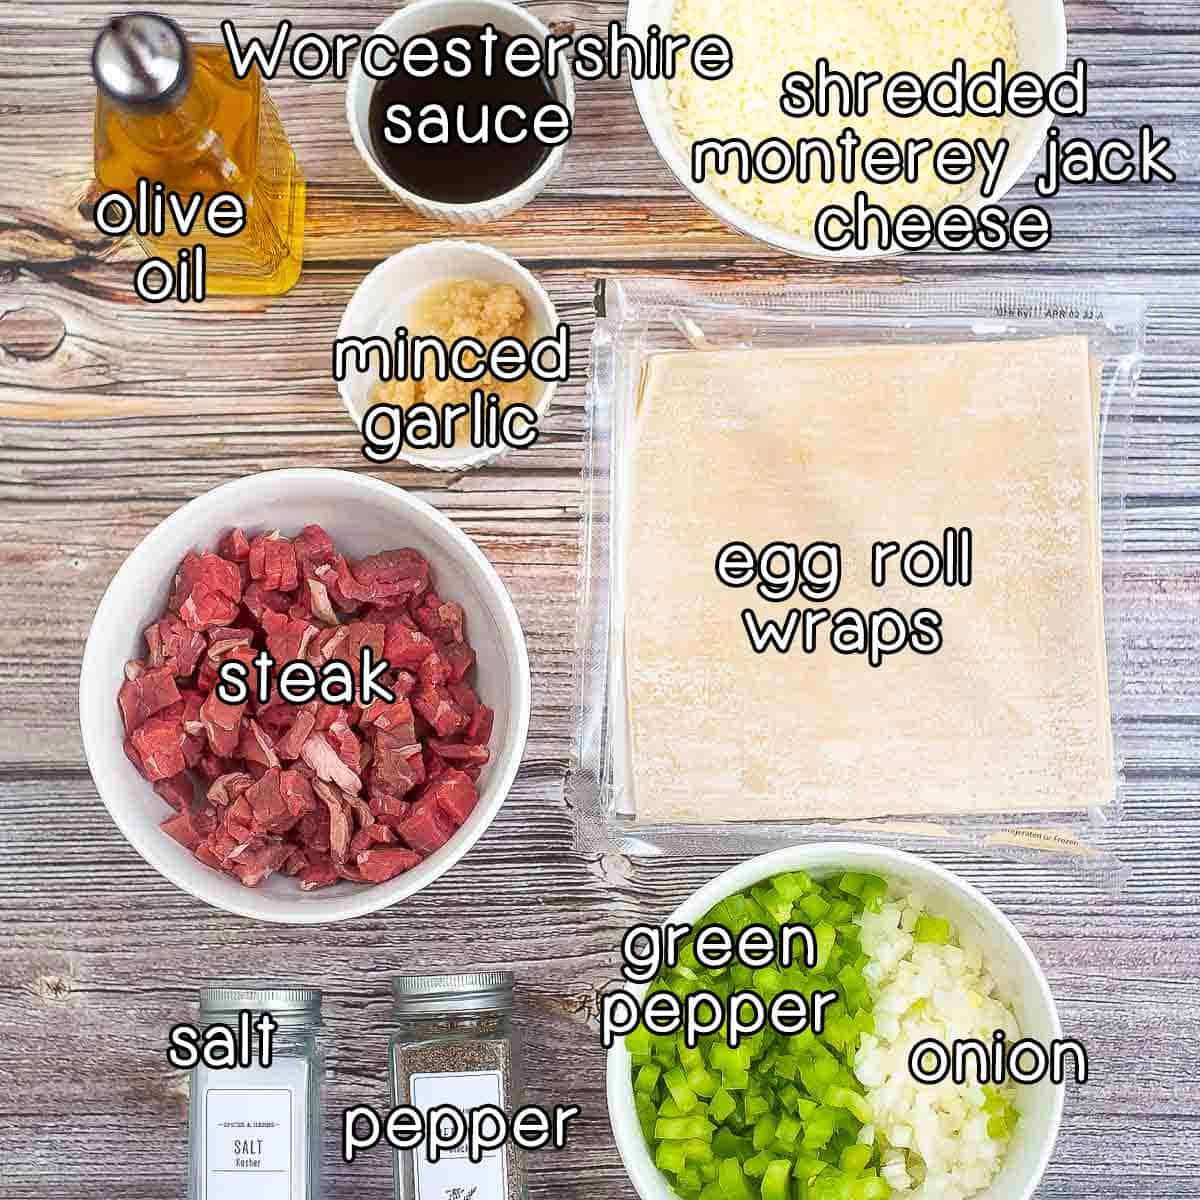 Overhead shot of ingredients - olive oil, Worcestershire sauce, minced garlic, shredded Monterey Jack, steak, egg roll wraps, salt and pepper, green pepper, and onion.